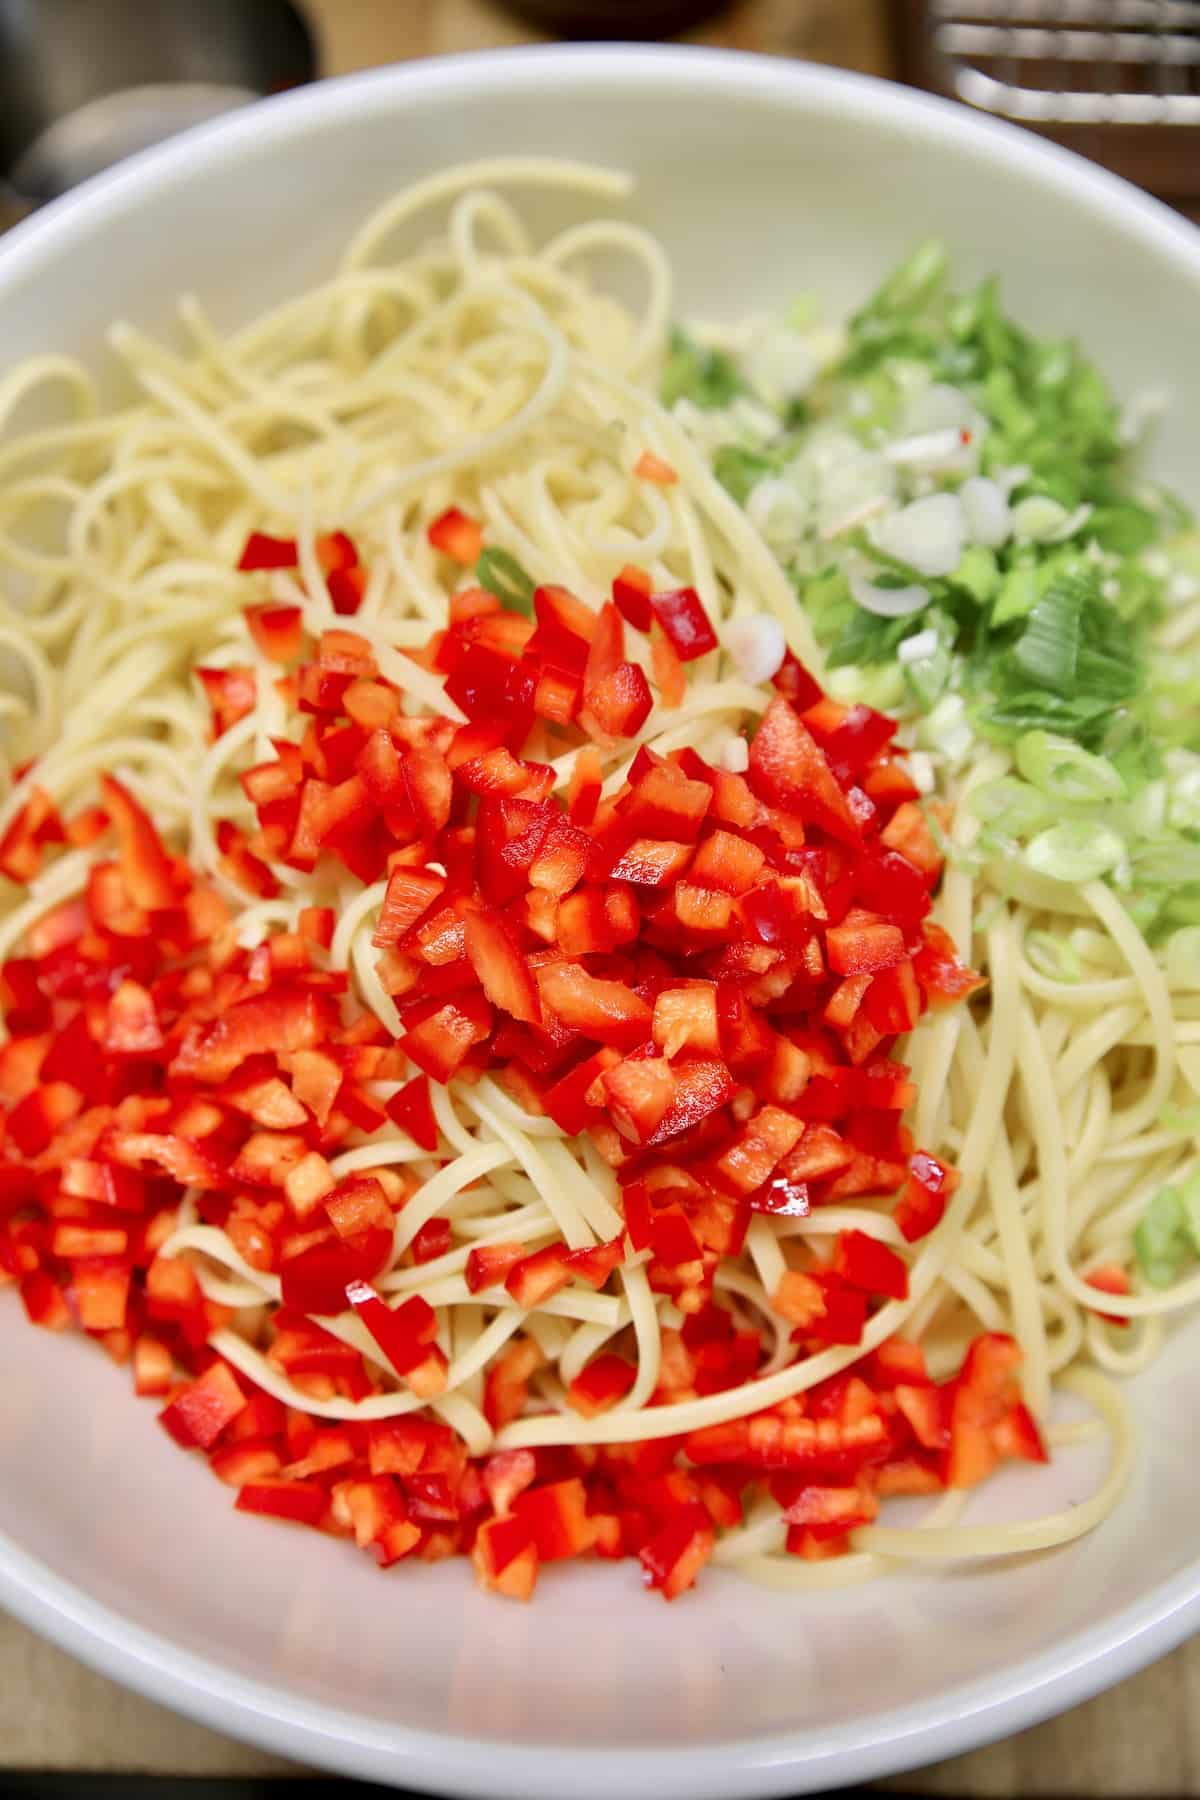 Linguine, green onions and red bell peppers in a bowl.